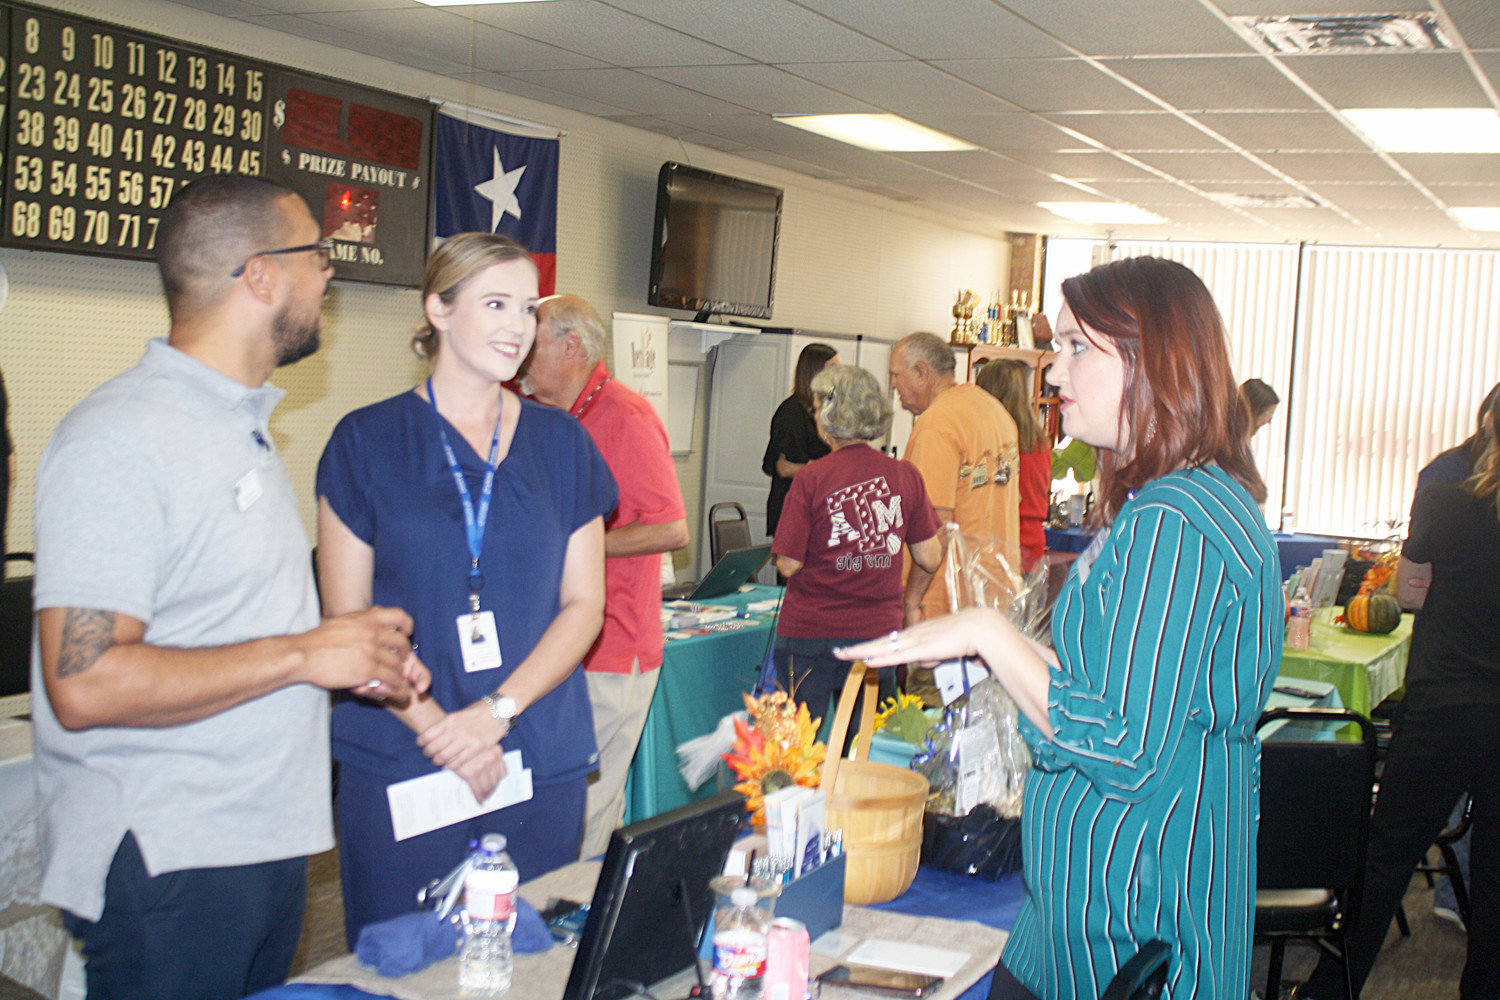 Katrina Davis of Reflections Hospice in Quitman speaks with Michael Howard and Angela Morris from Jordan Health at the Forever Young Activity Center community health fair for all ages on Oct. 4.